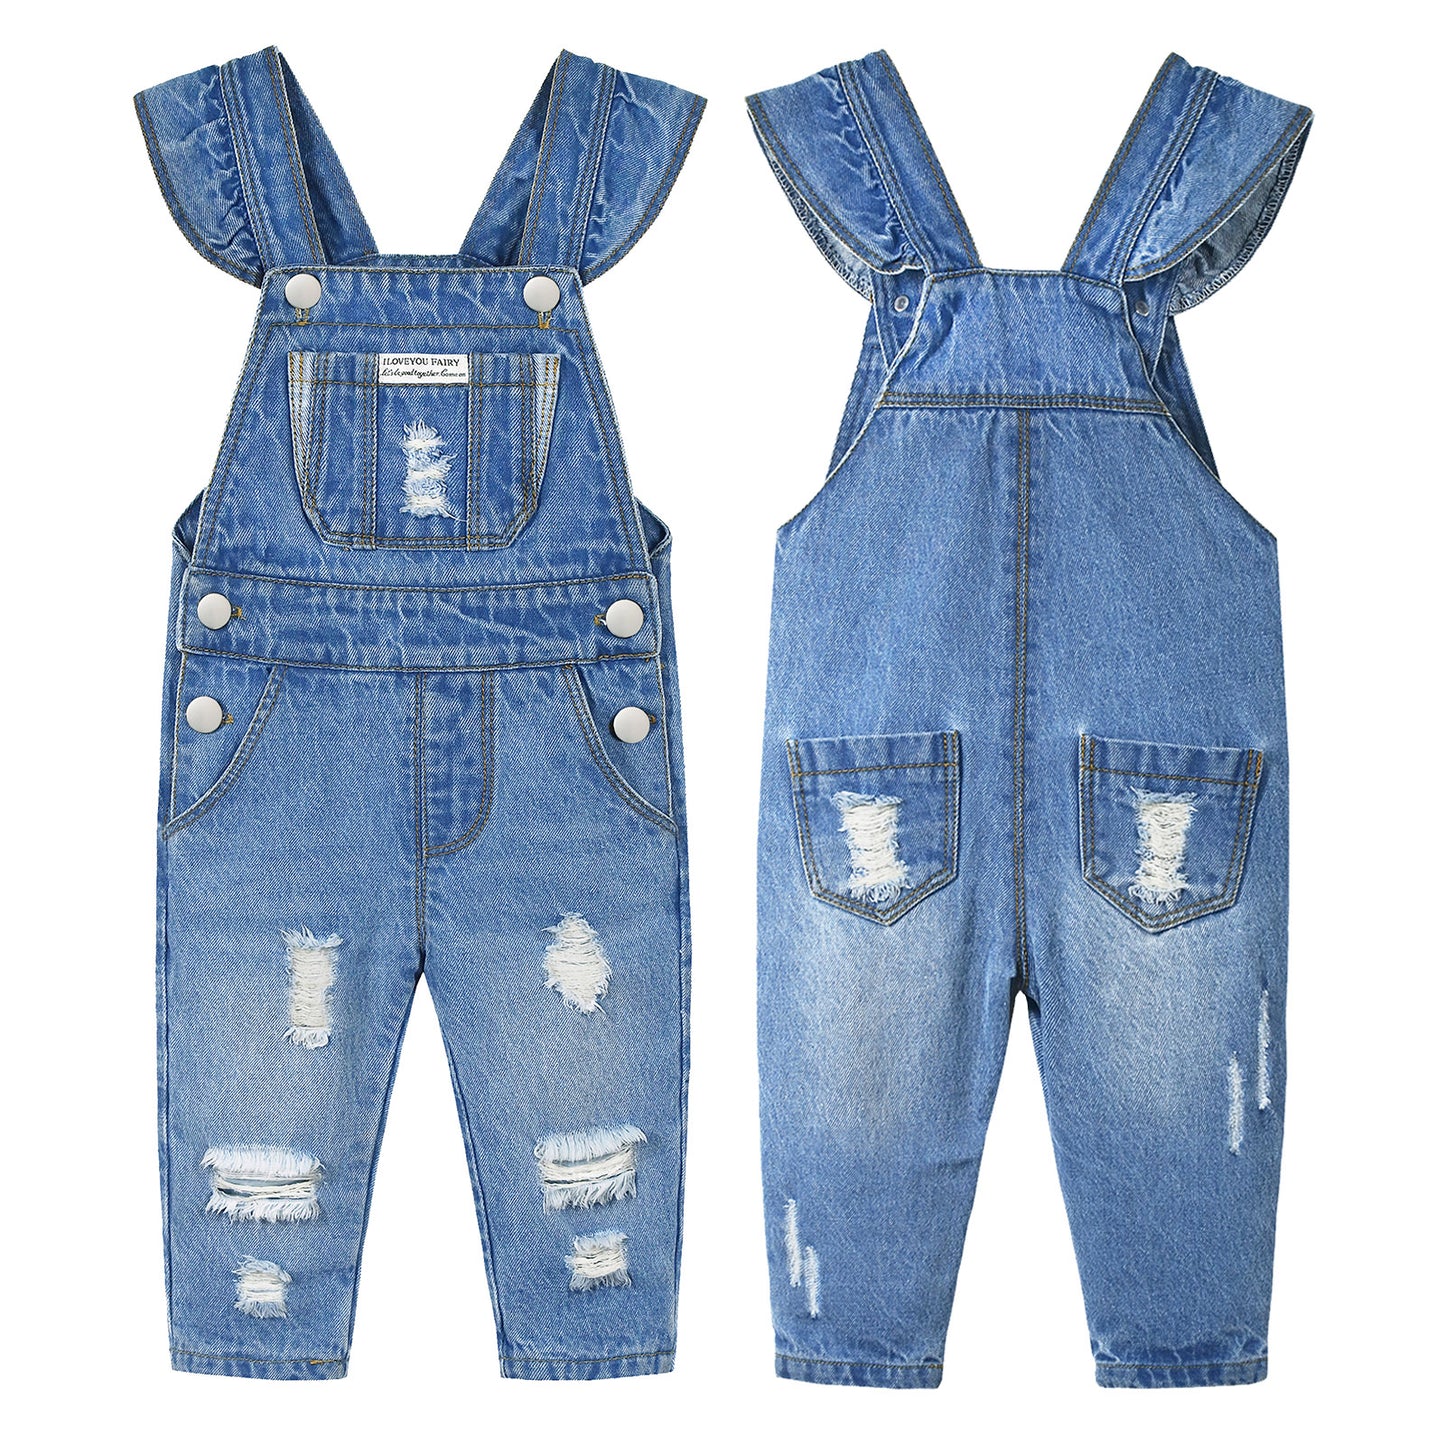 Baby Big Front Pocket Ripped Ruffled Jeans Overalls